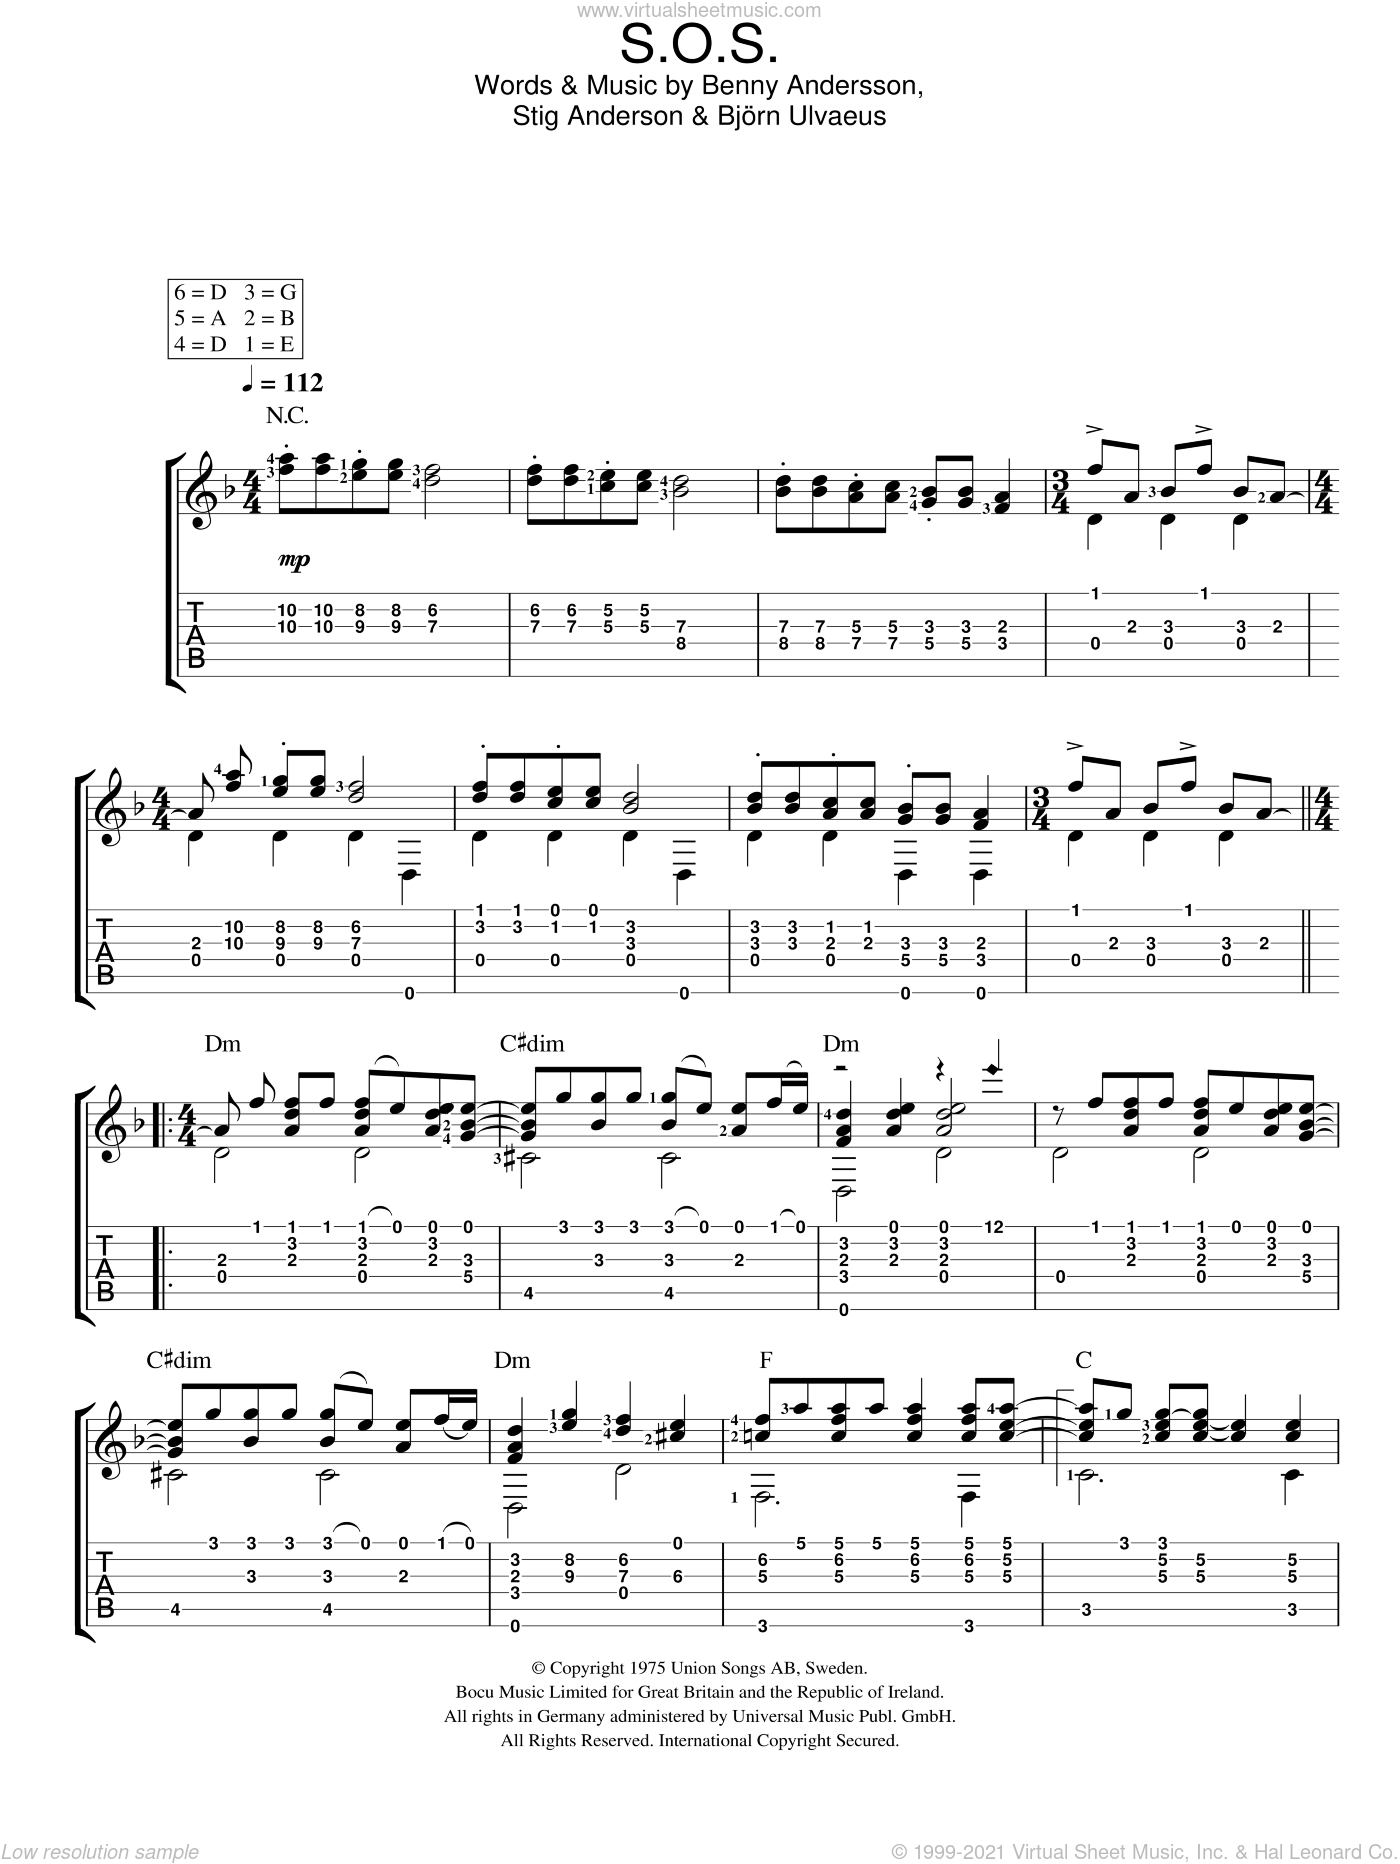 Abba S O S Sheet Music For Guitar Solo Easy Tablature Pdf Back | video and audio performances by our users (0). abba s o s sheet music for guitar solo easy tablature pdf